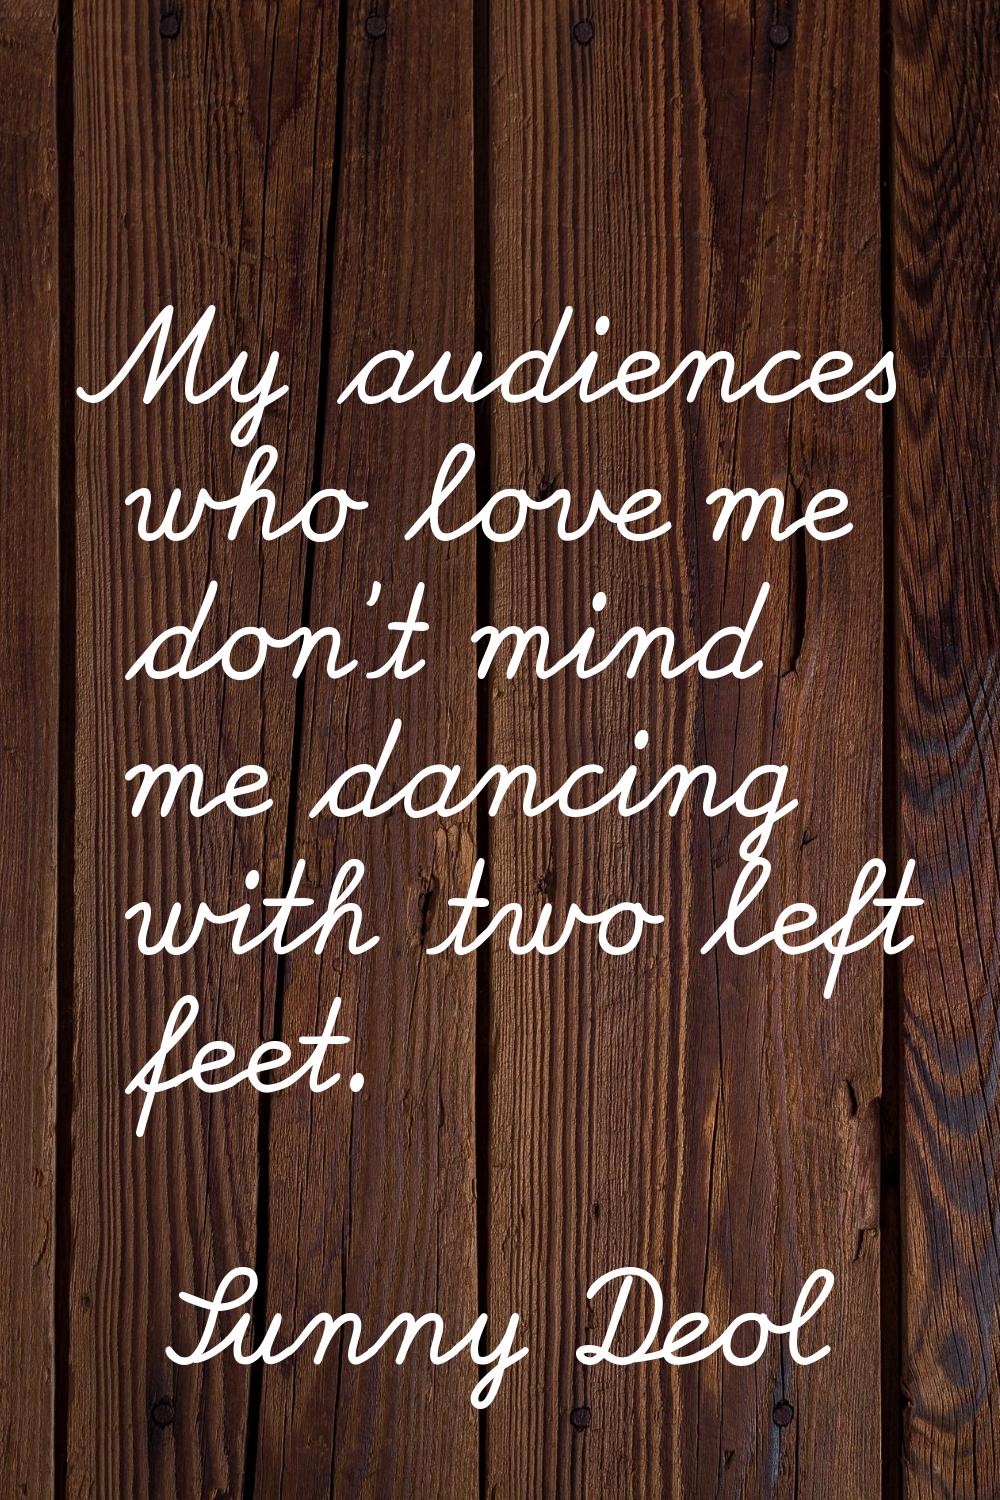 My audiences who love me don't mind me dancing with two left feet.